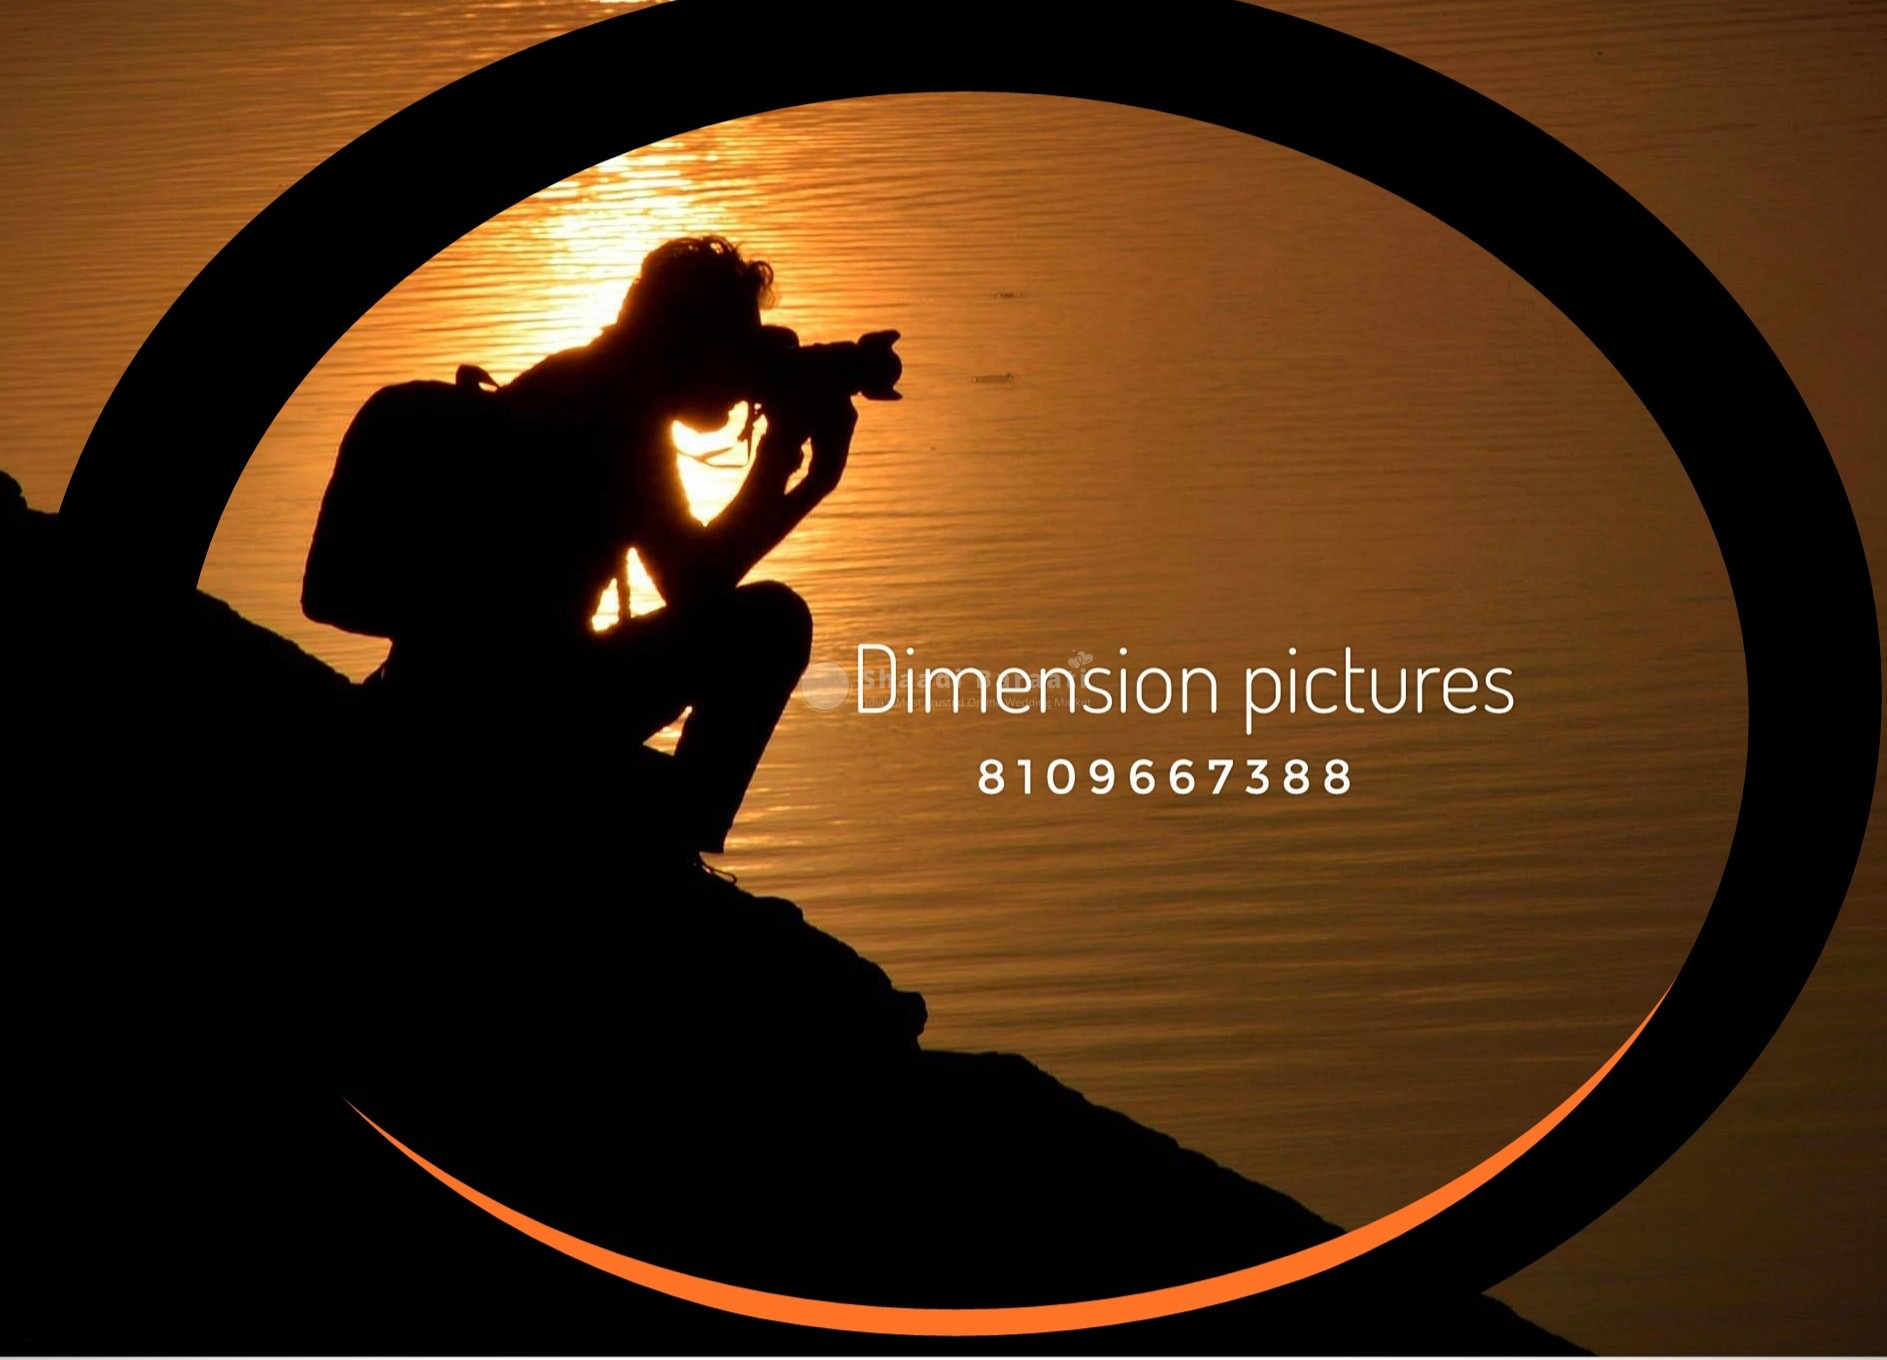 Dimension pictures